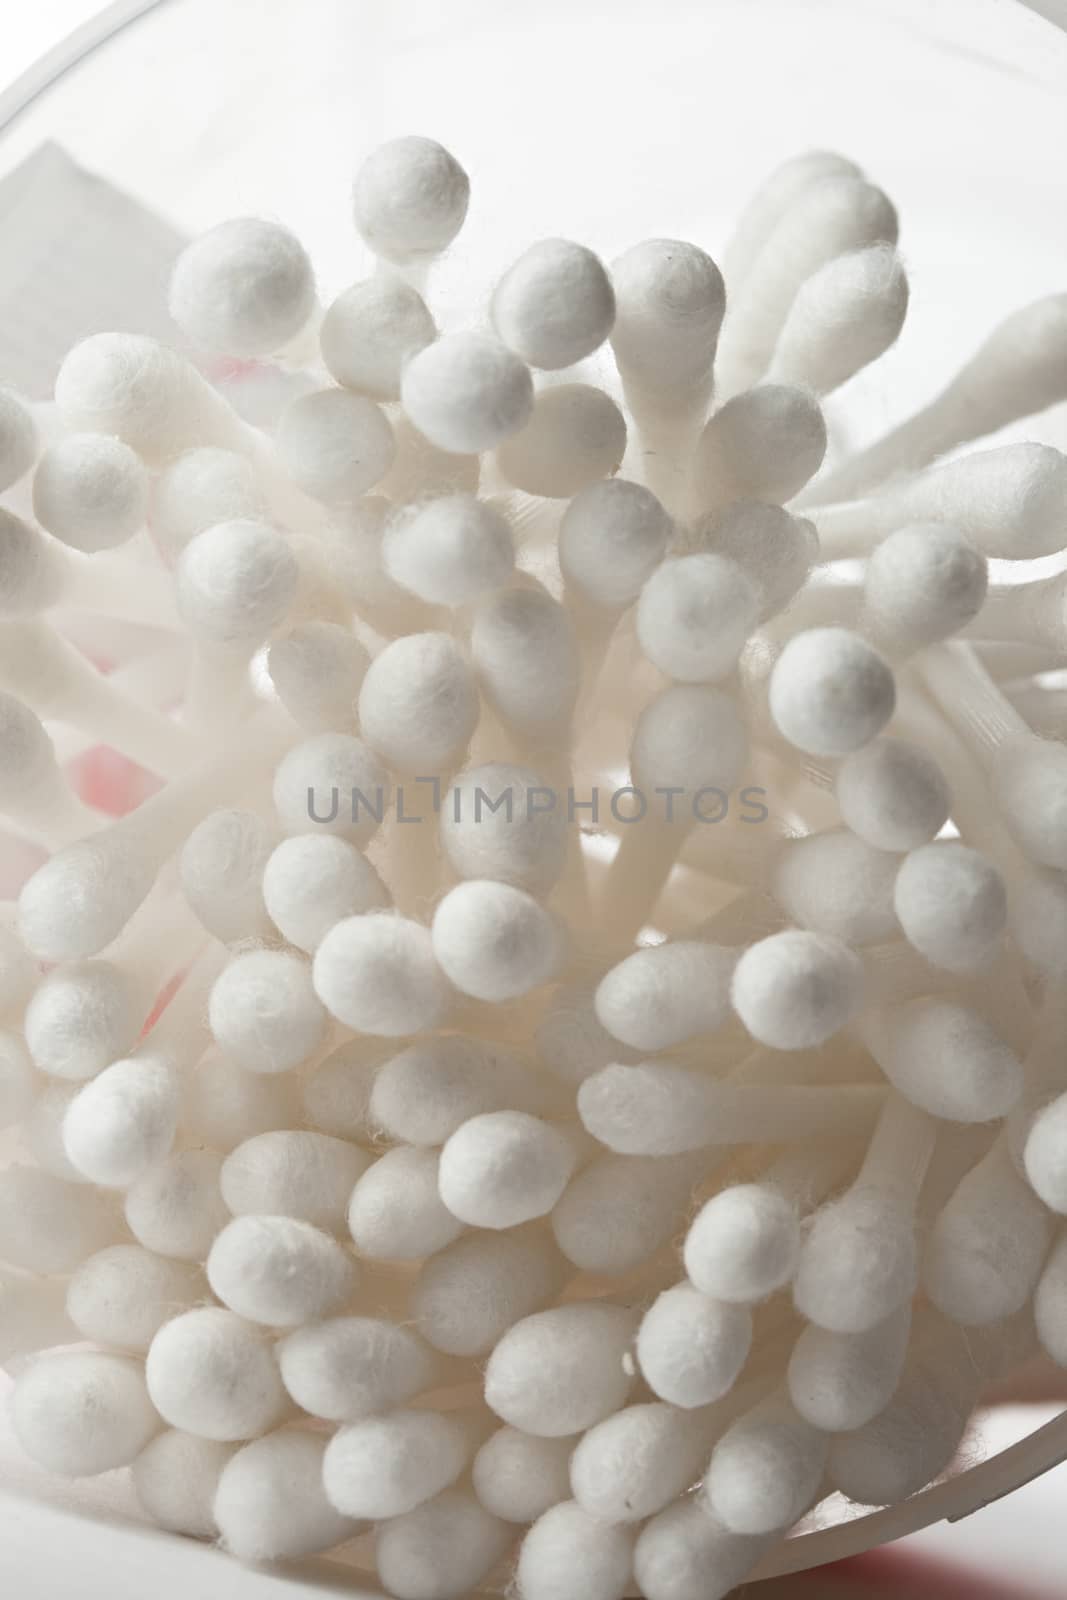 White cotton swabs in plastic container by Garsya